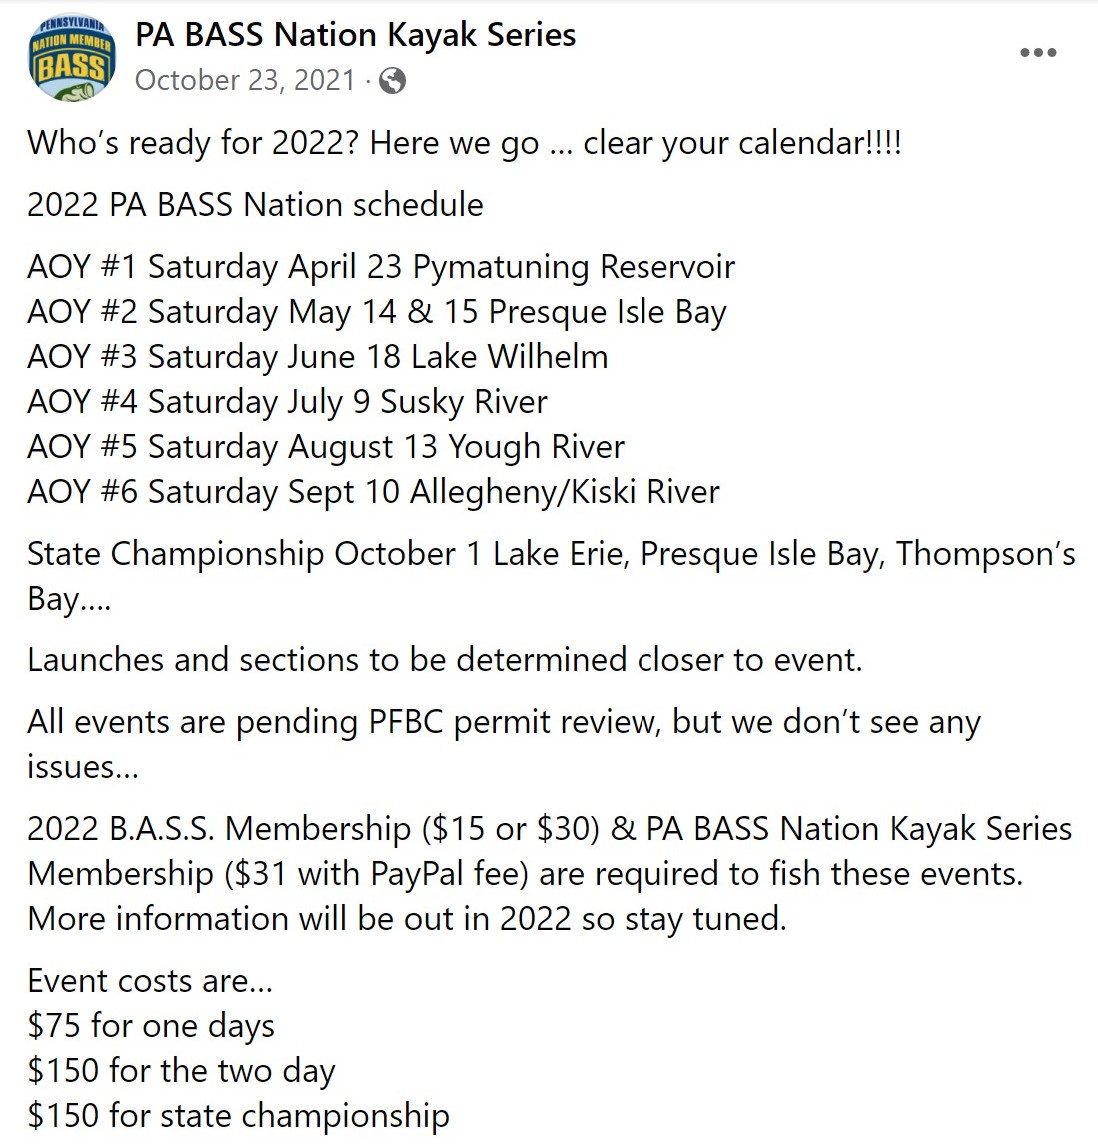 The 2022 schedule for PBNKS